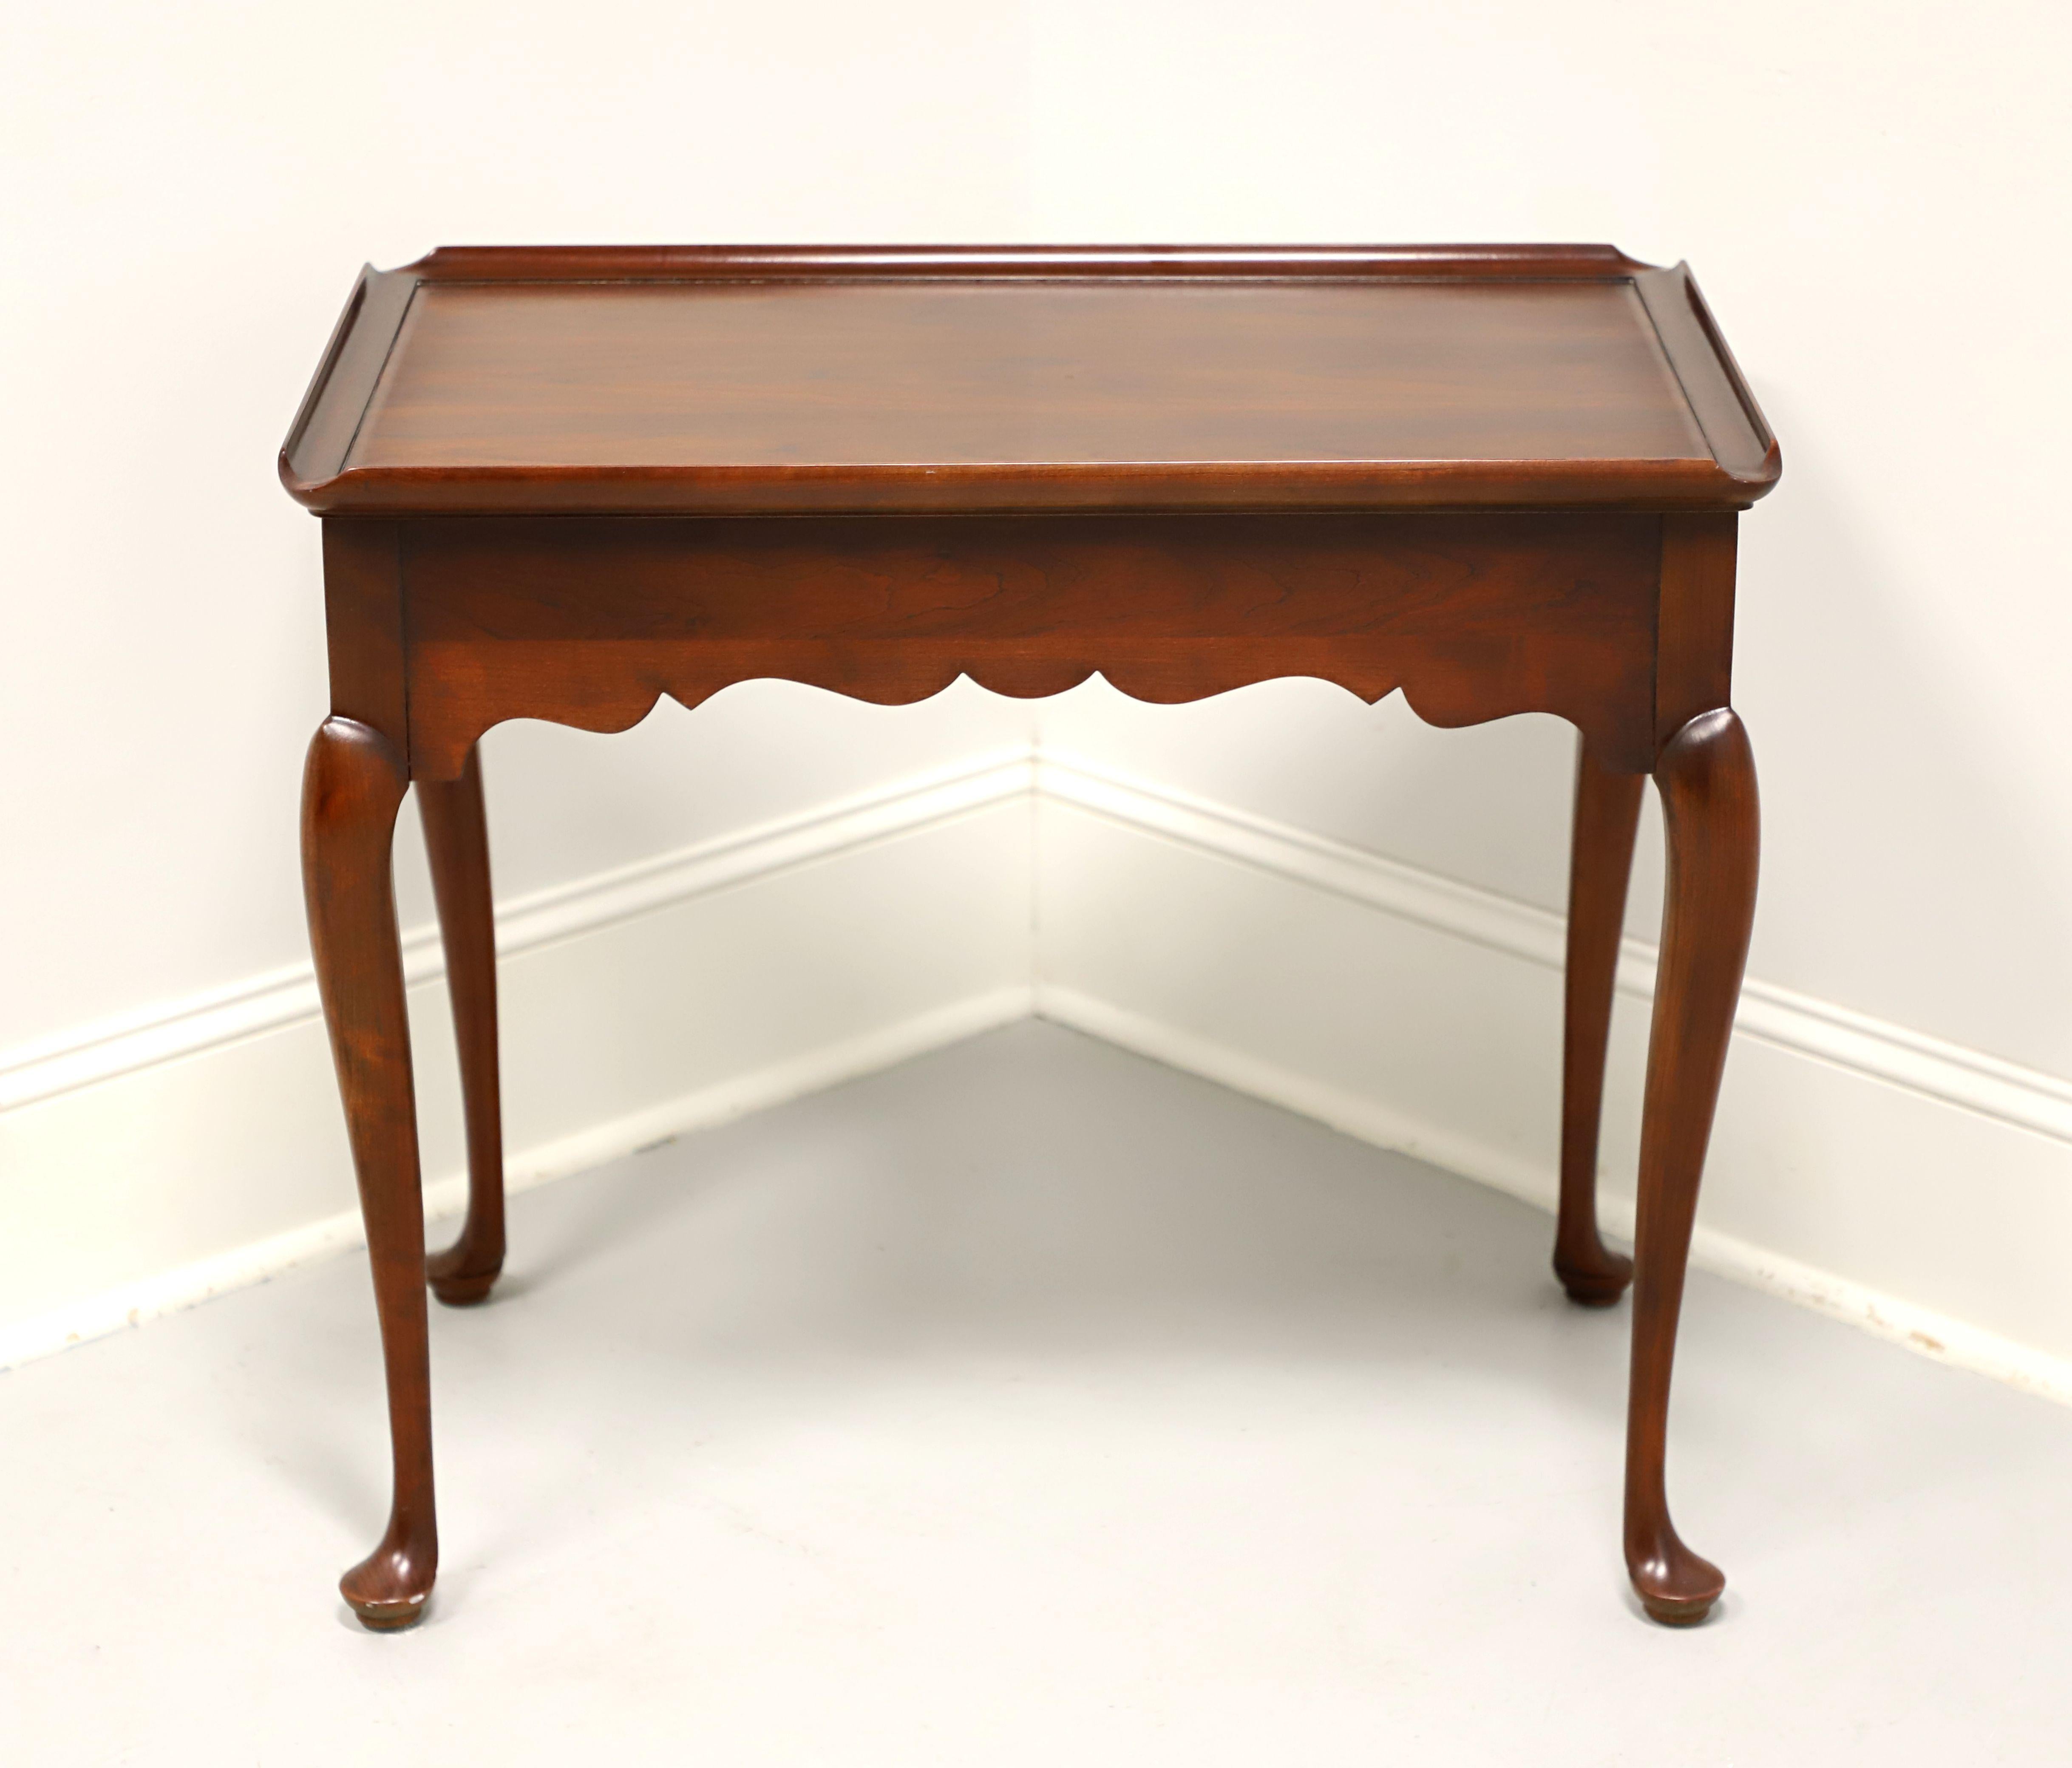 STATTON Centennial Solid Cherry Queen Anne Tea Table In Good Condition For Sale In Charlotte, NC